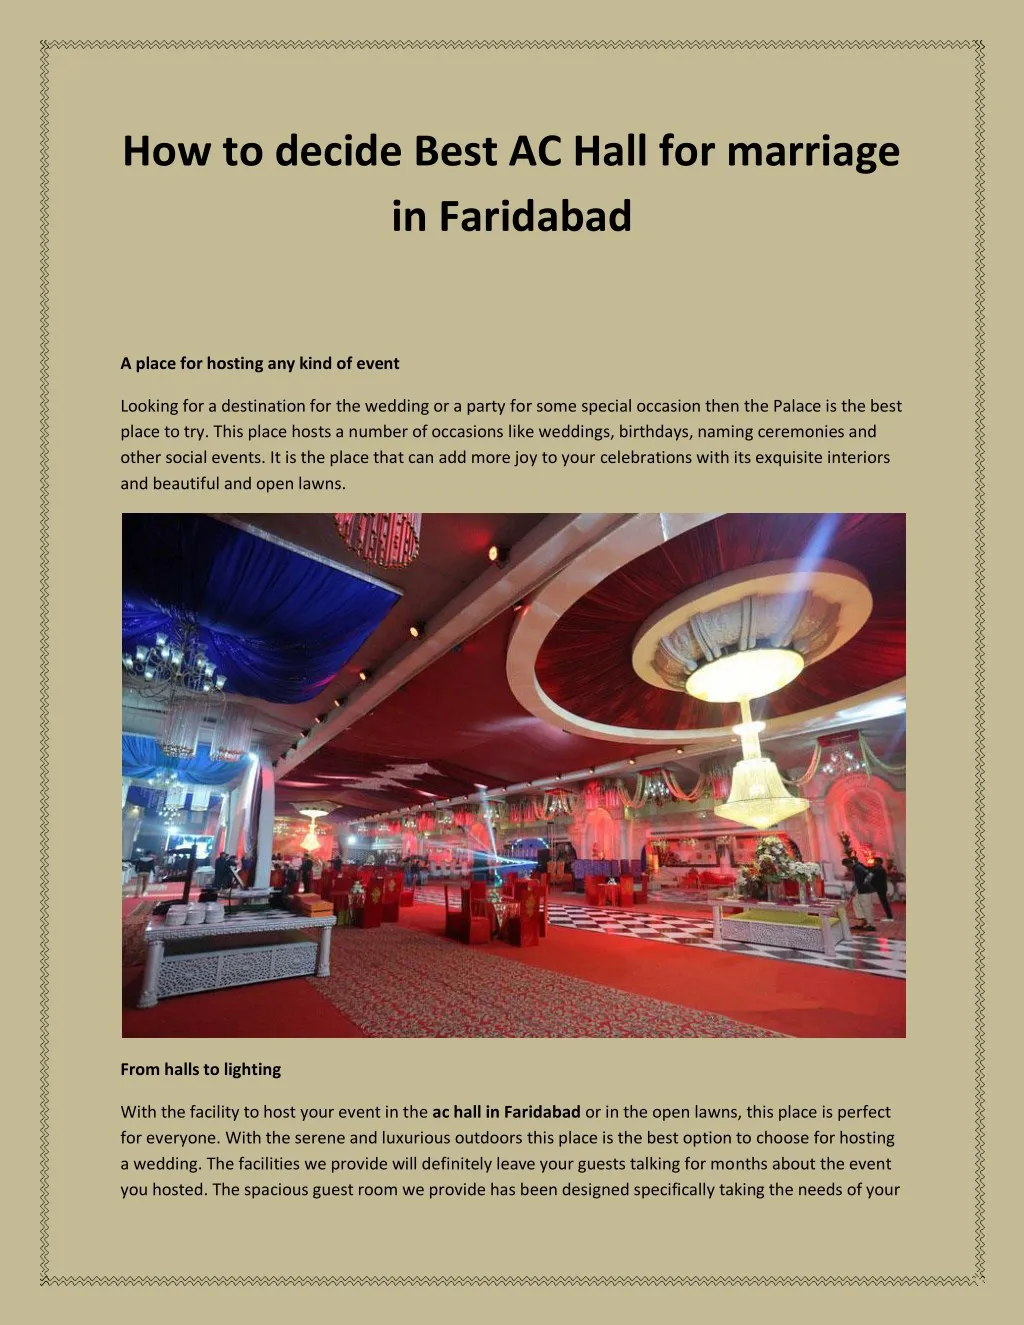 how to decide best ac hall for marriage